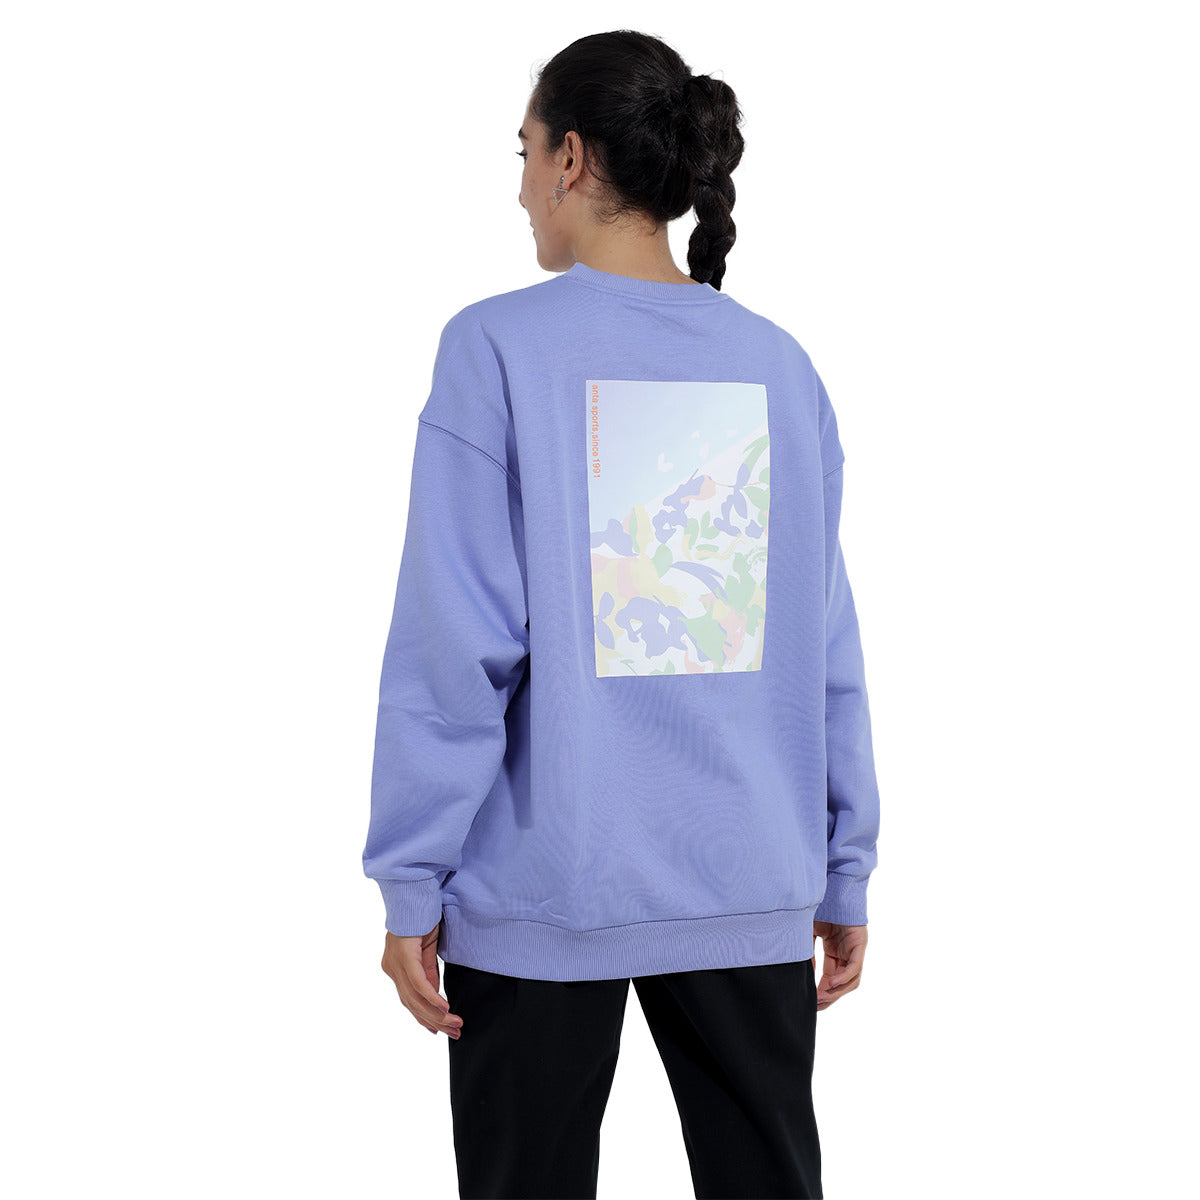 Anta Sweatshirt with Long Sleeves For Women, Blue